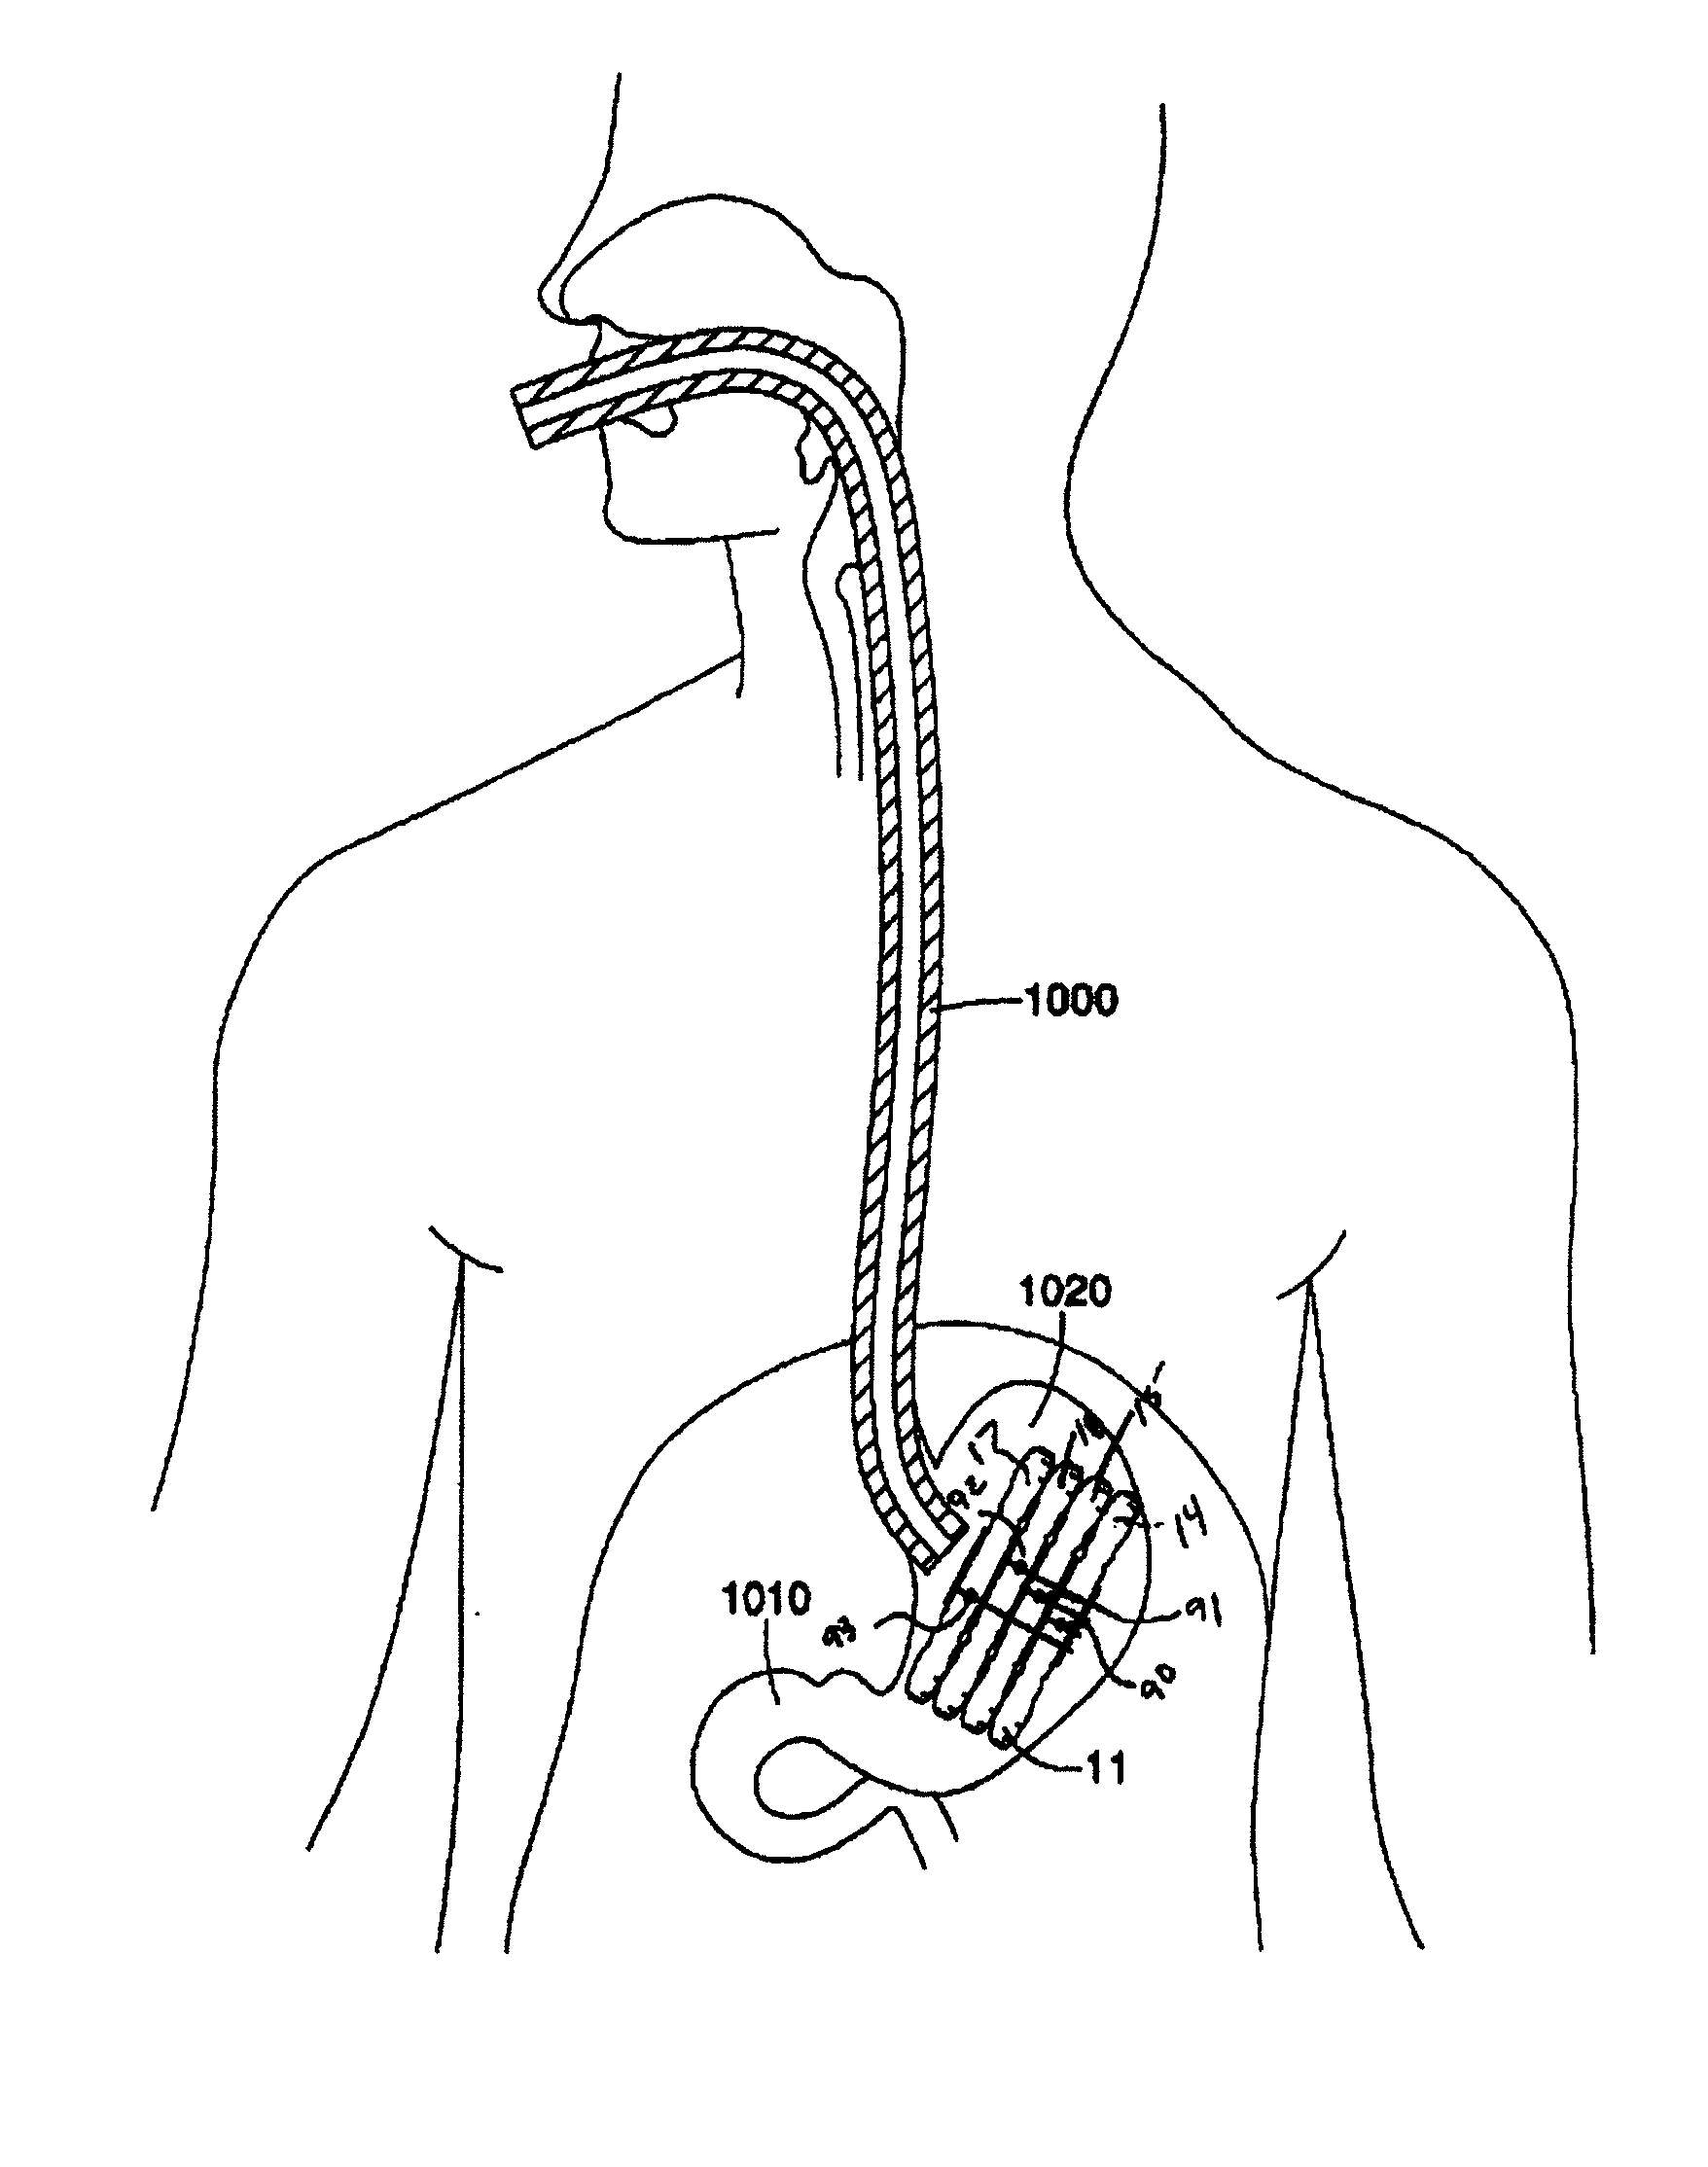 Method of delivering an intragastric device for treating obesity